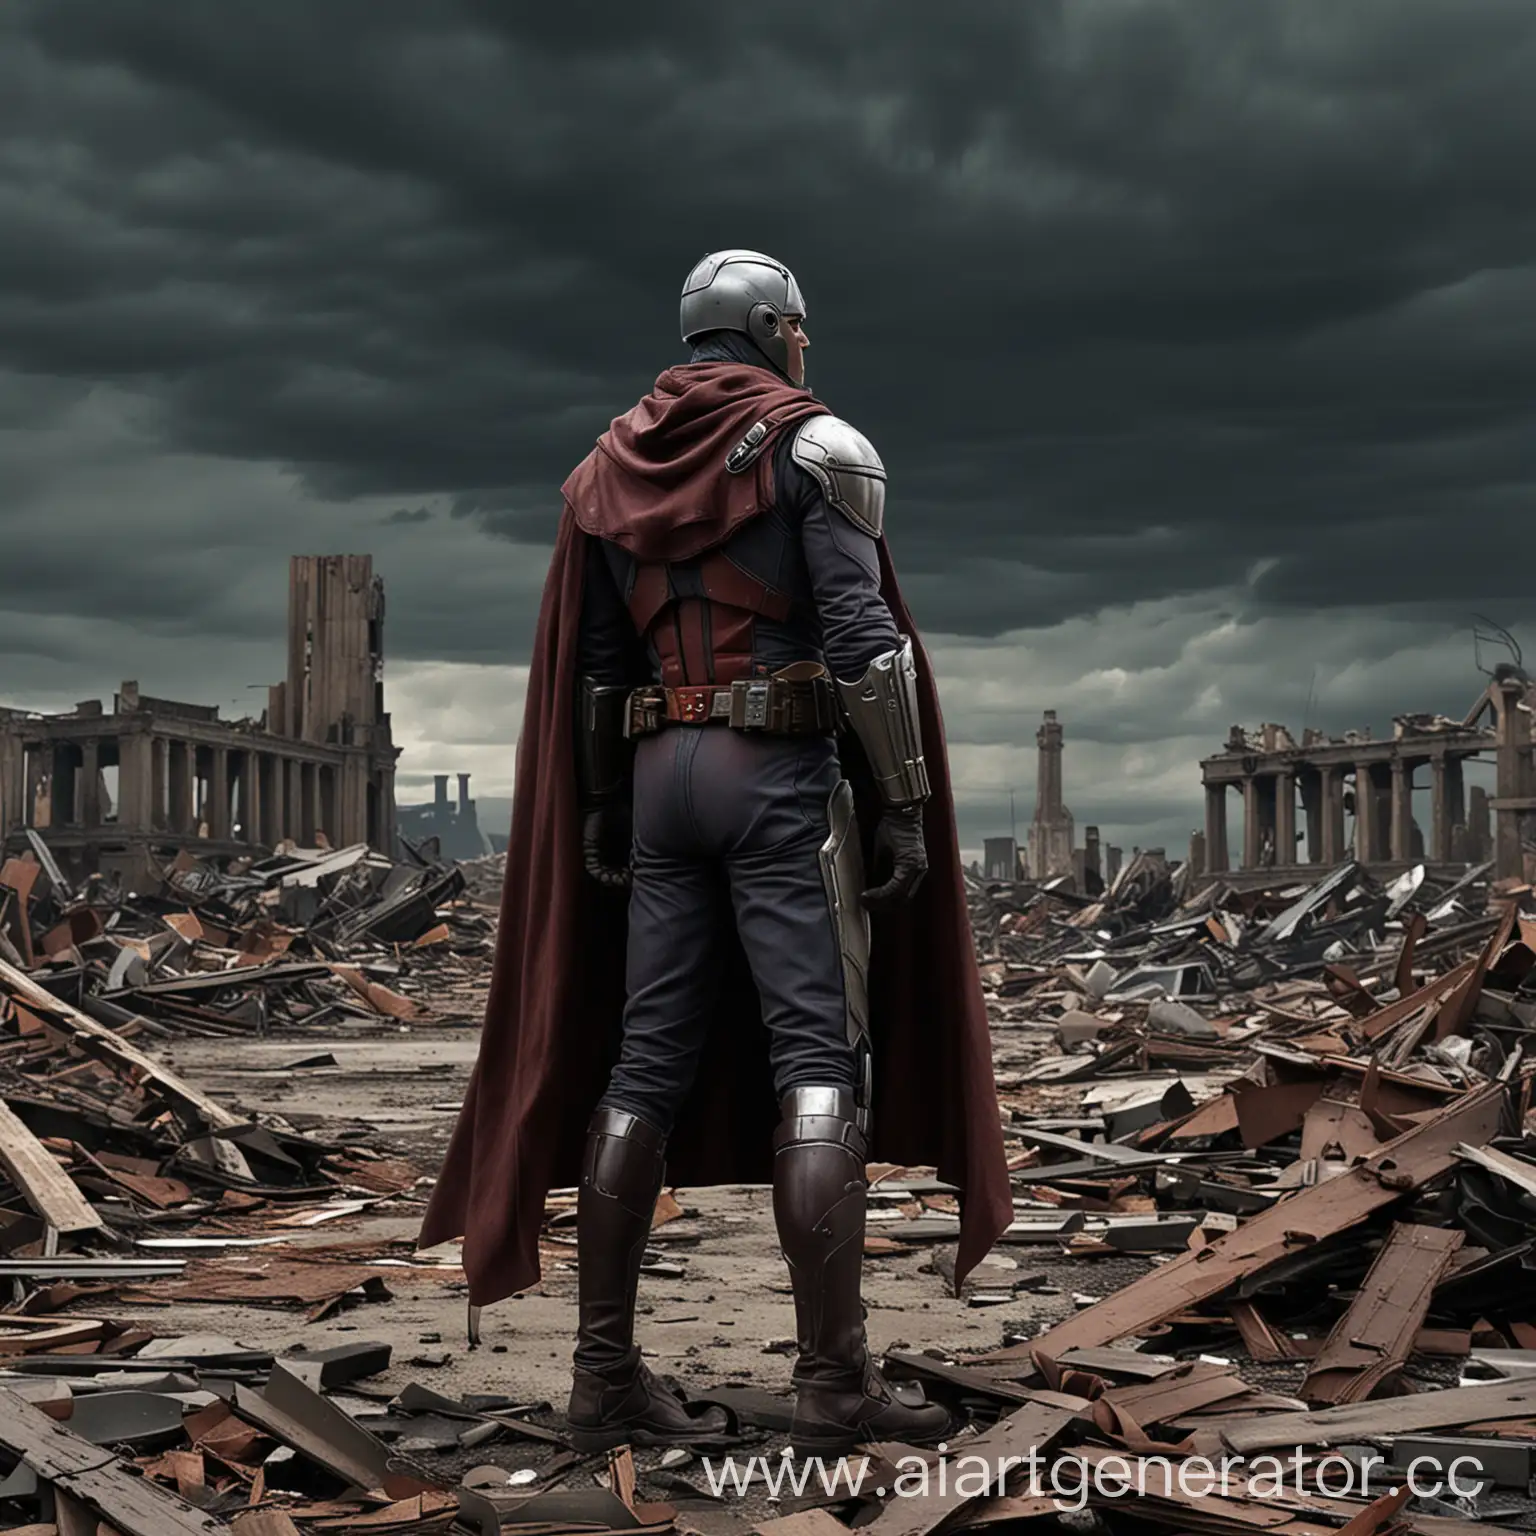 A desolate, post-apocalyptic world, with ruins and dark skies. Magneto stands among the debris, looking determined. [High detail, dramatic lighting]